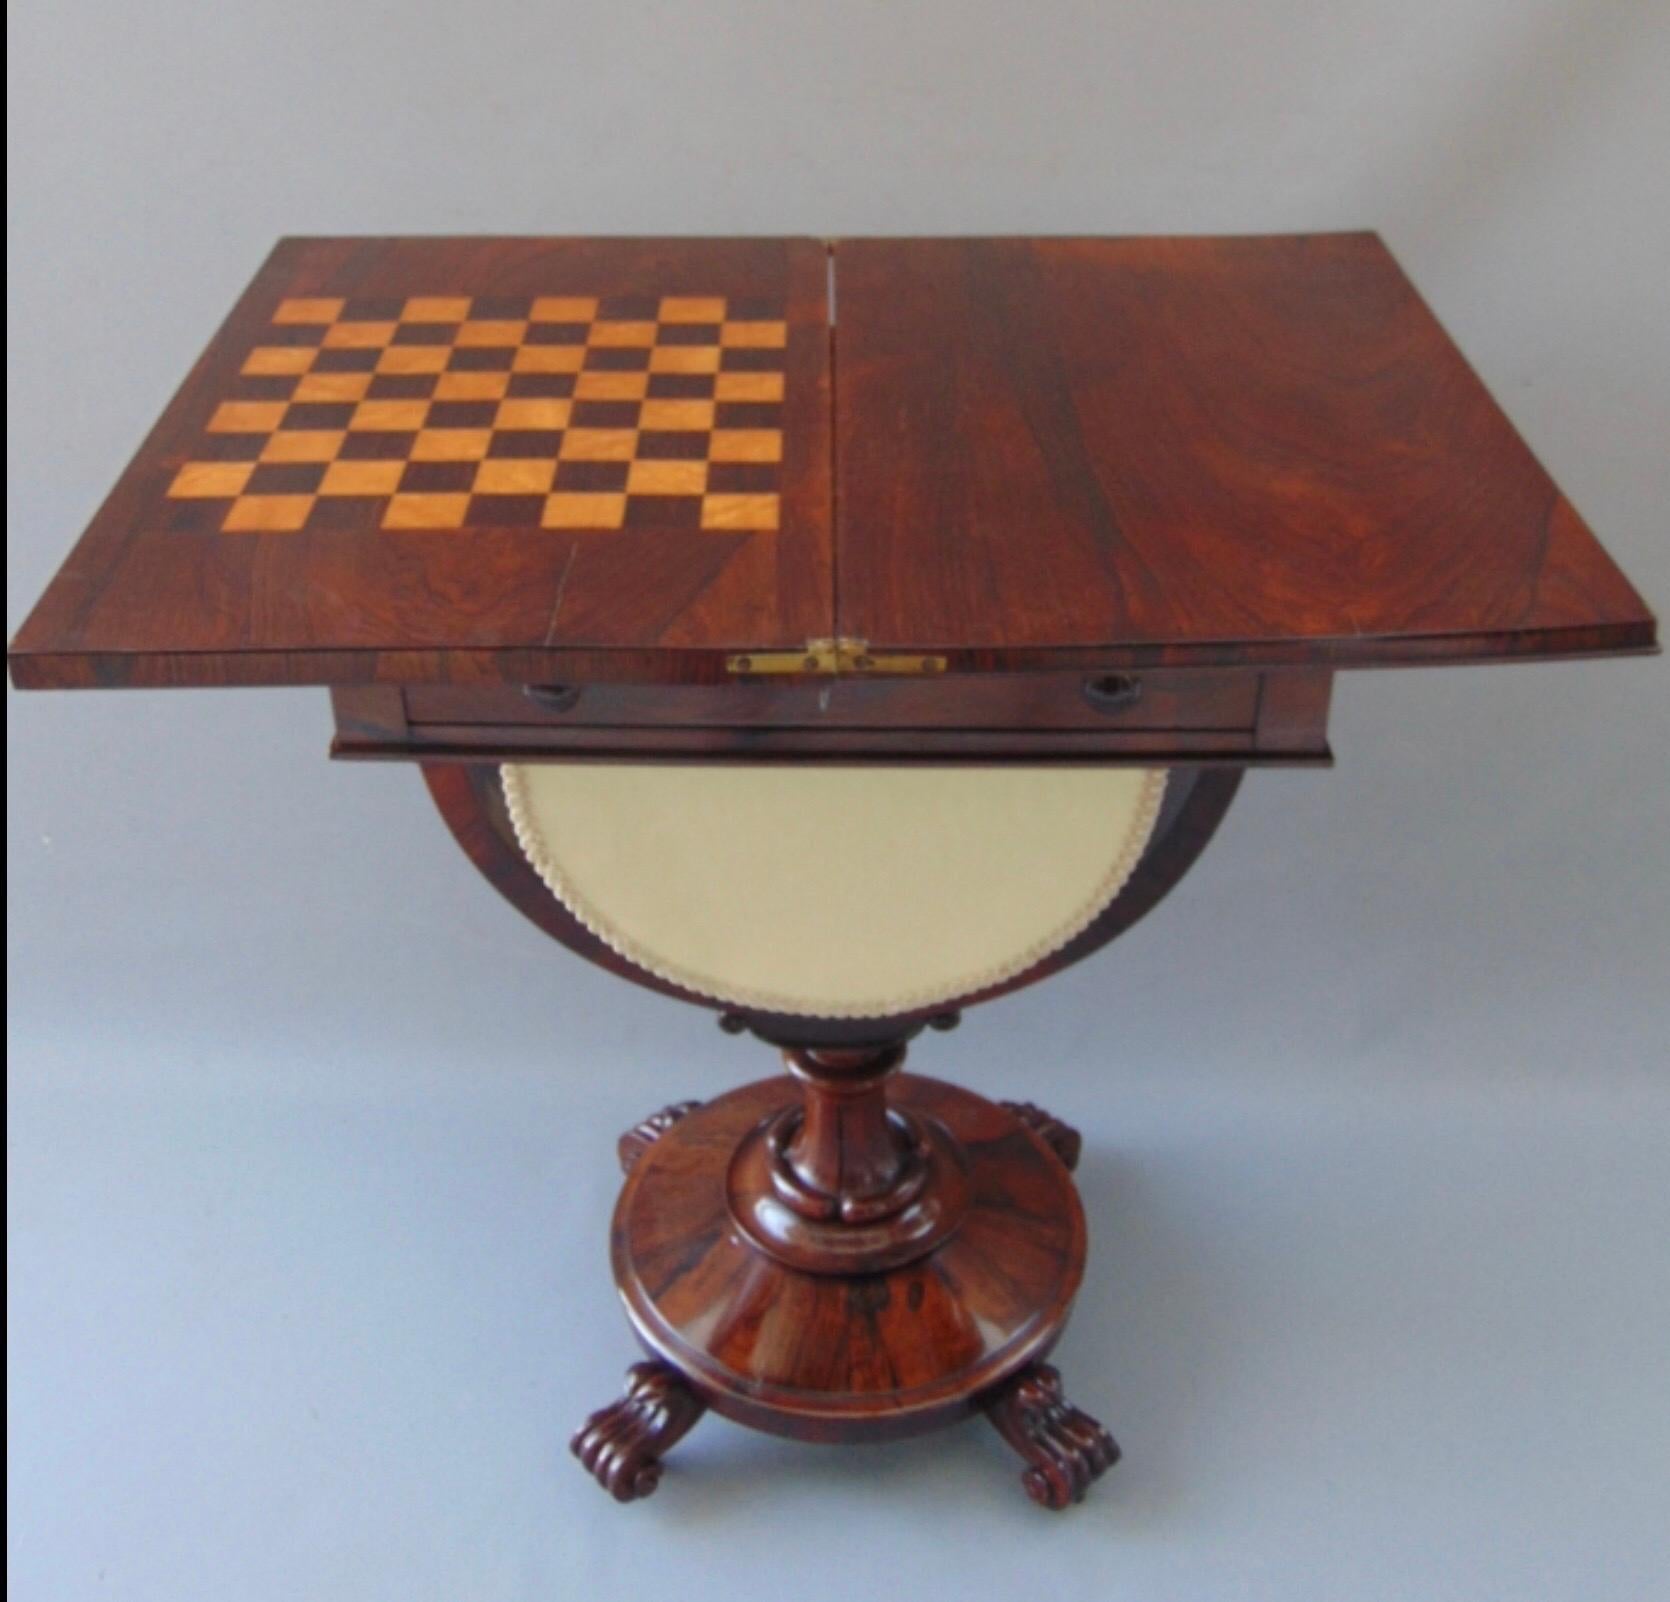 Superb William IV rosewood antique sewing work table with games, chess, lamp table
c1835
Measures: 20.5ins x 13.5ins x 30ins.